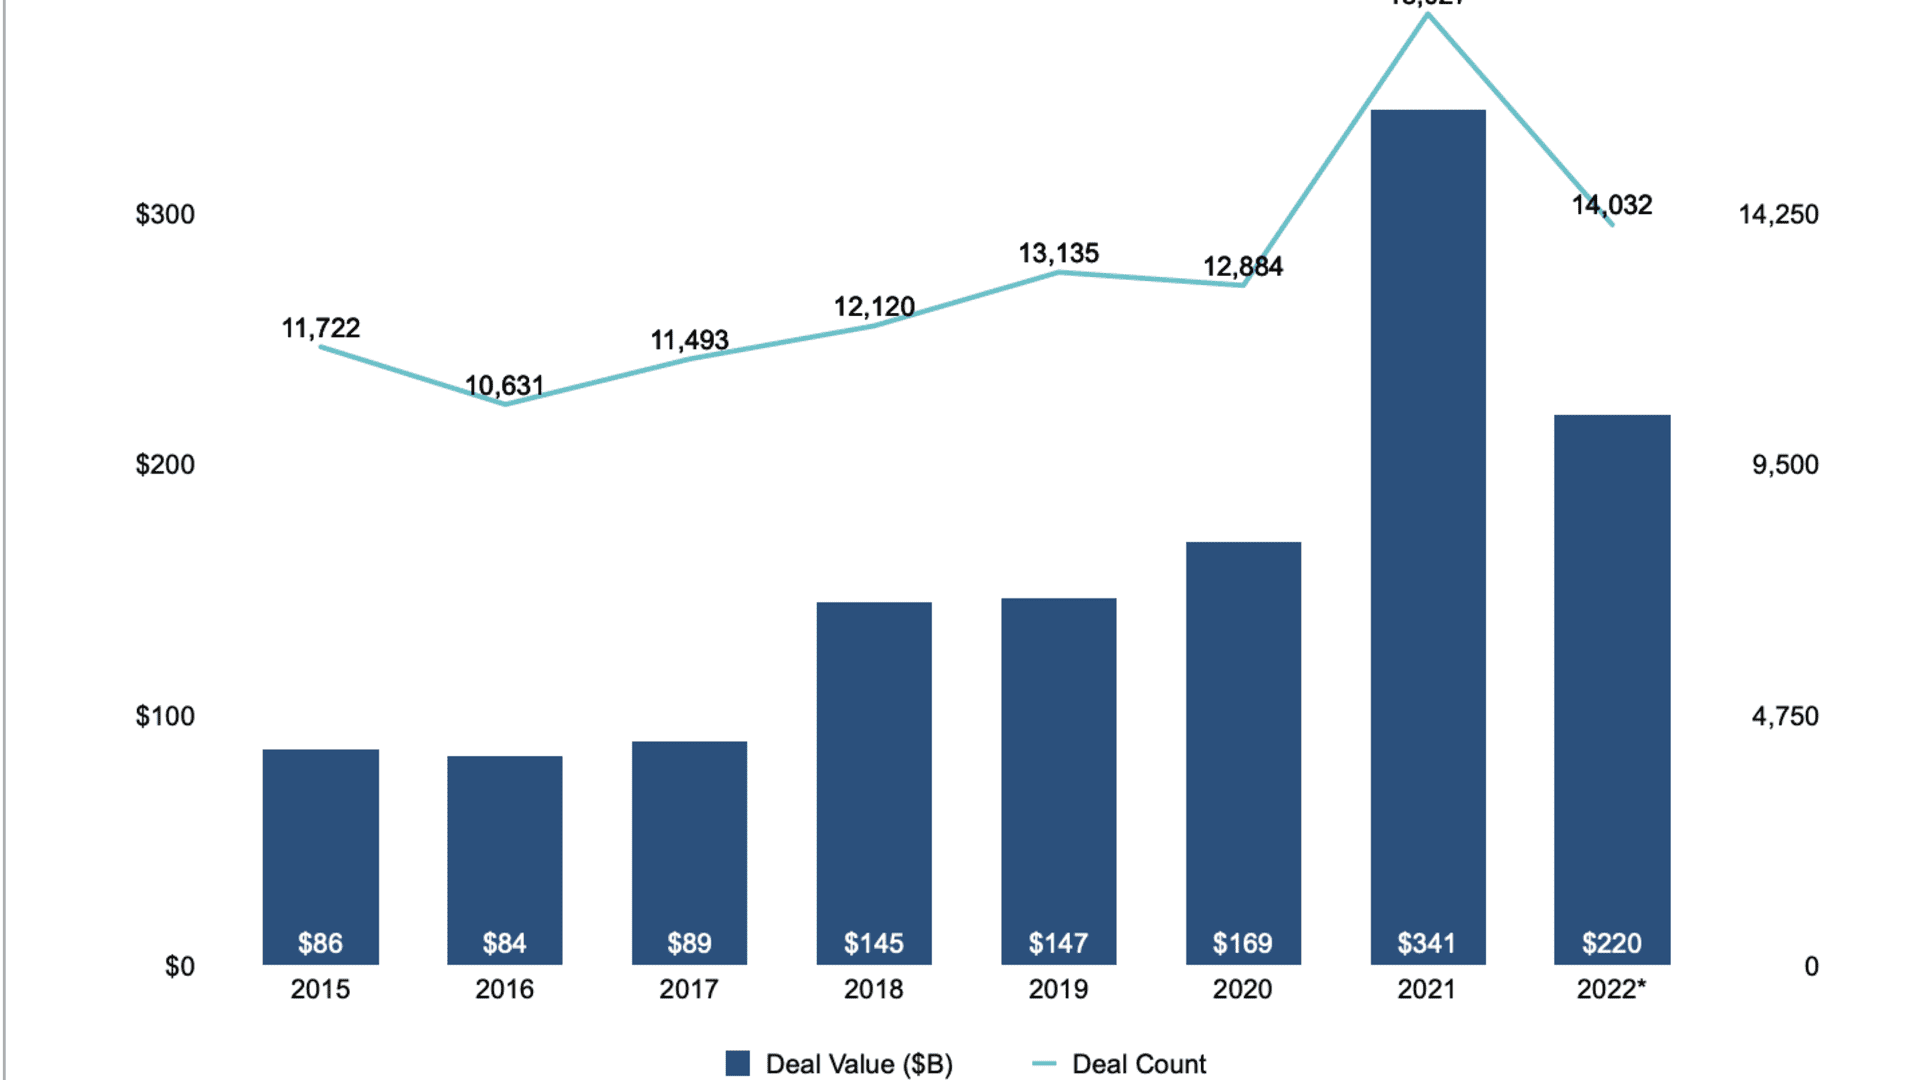 Total venture capital deal activity, according to Pitchbook data, for the last five years.